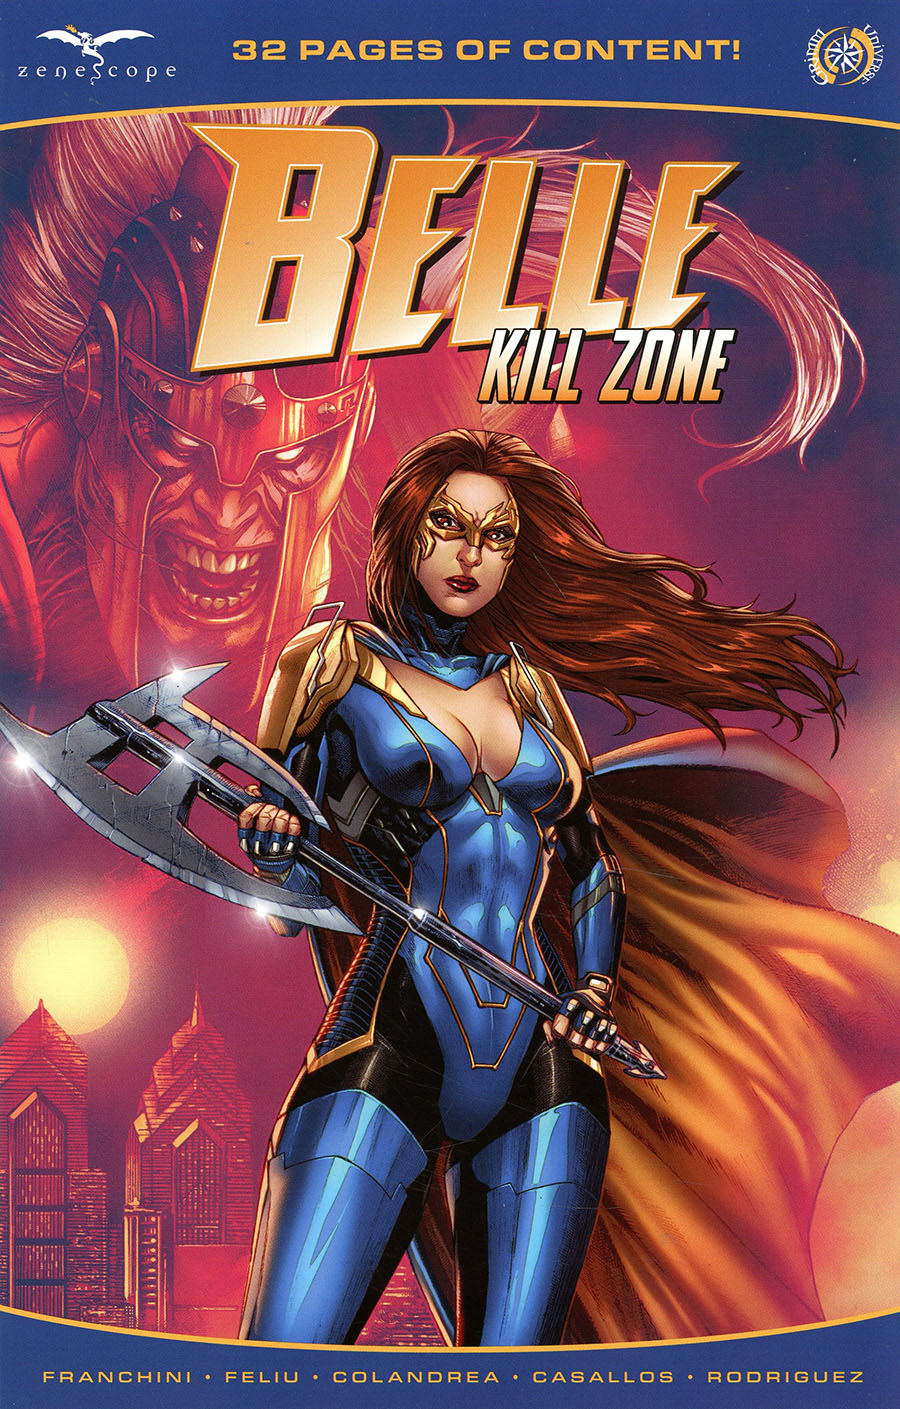 Grimm Fairy Tales Presents Belle Kill Zone #1 (One Shot) Cover A Felix Morales